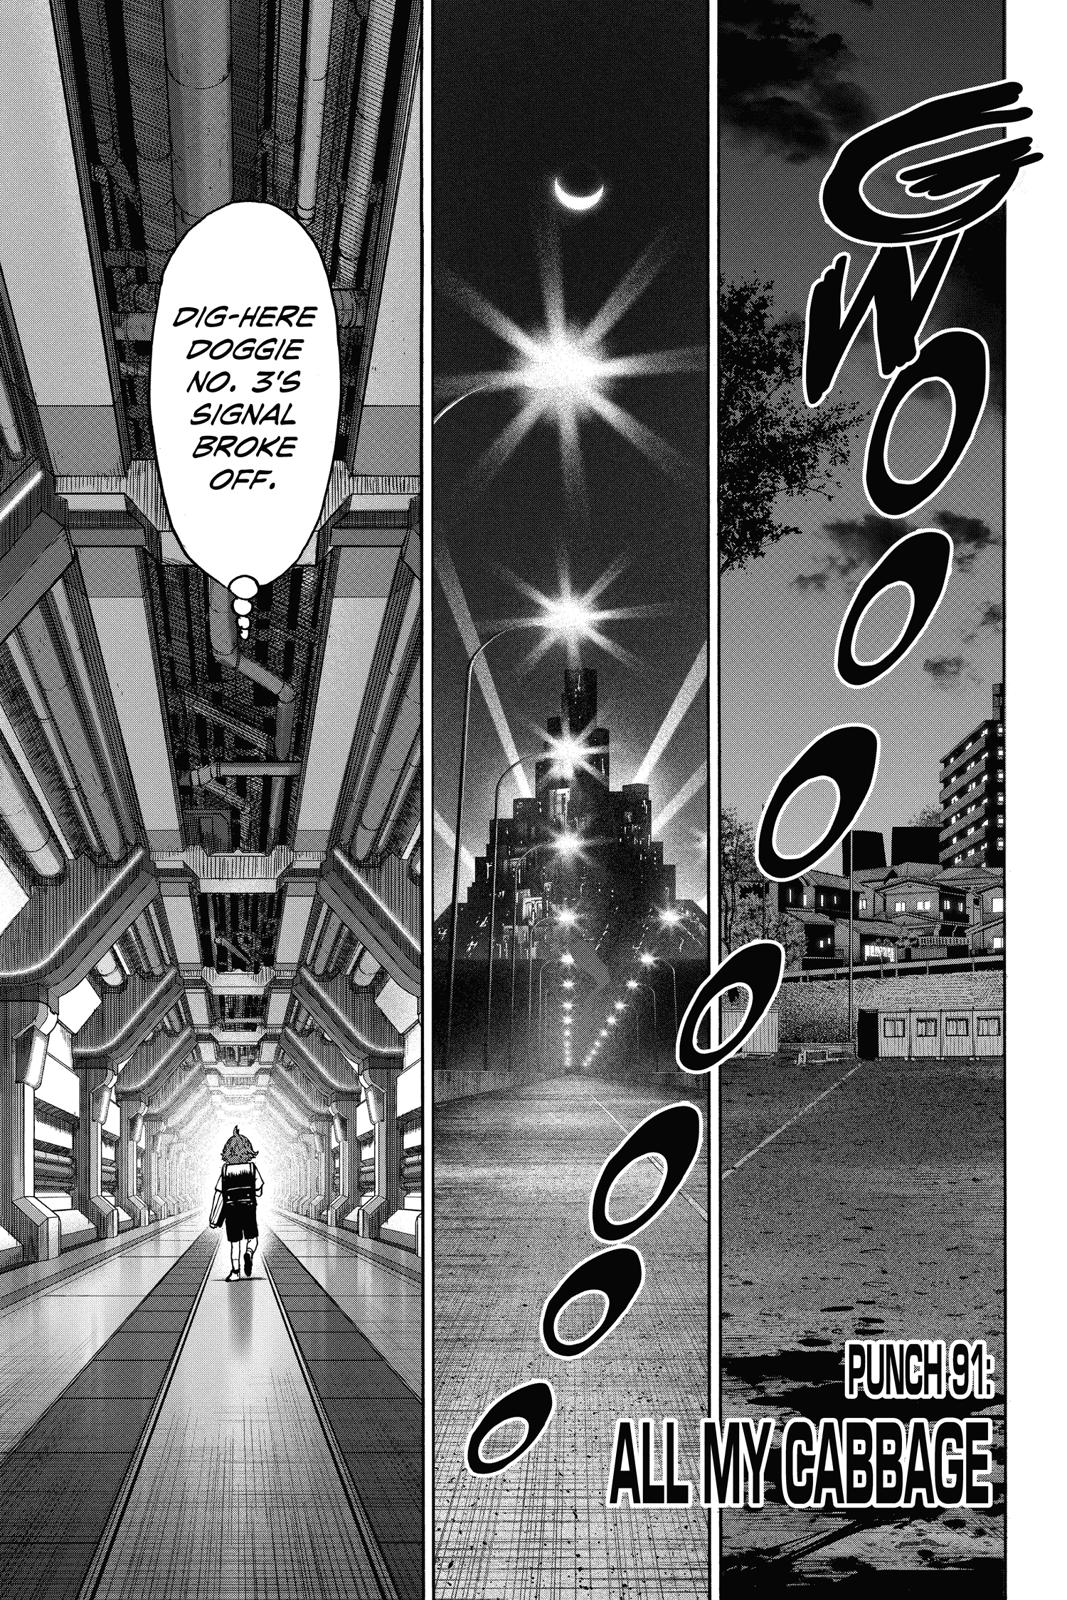 One-Punch Man, Punch 91 image 07